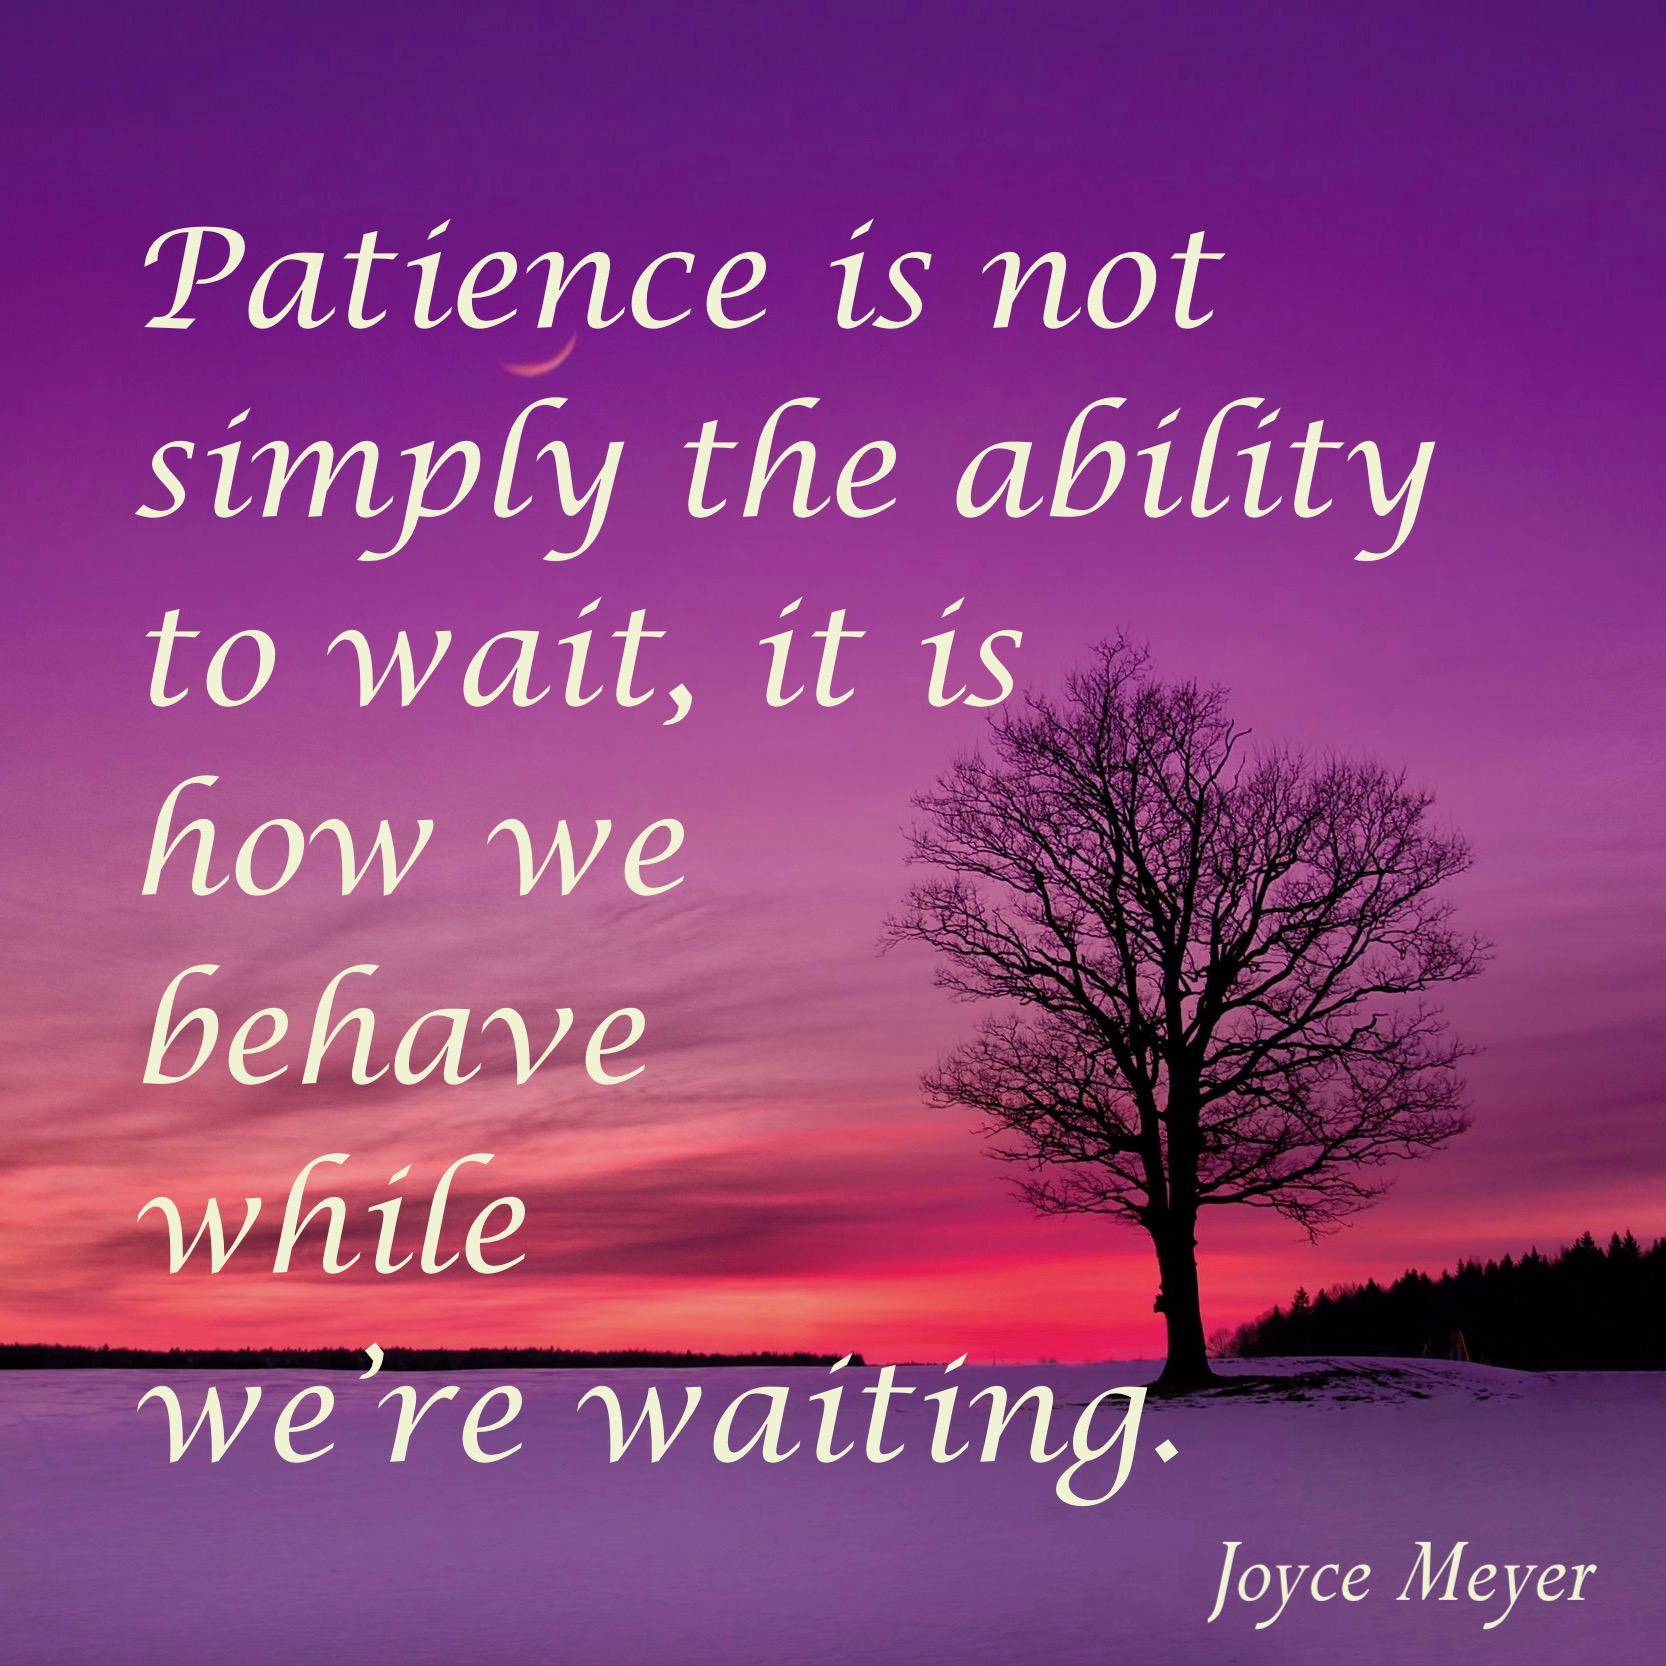 While you re waiting. Patience. Patience обои. Patience перевод. Long patience in Tagalog.